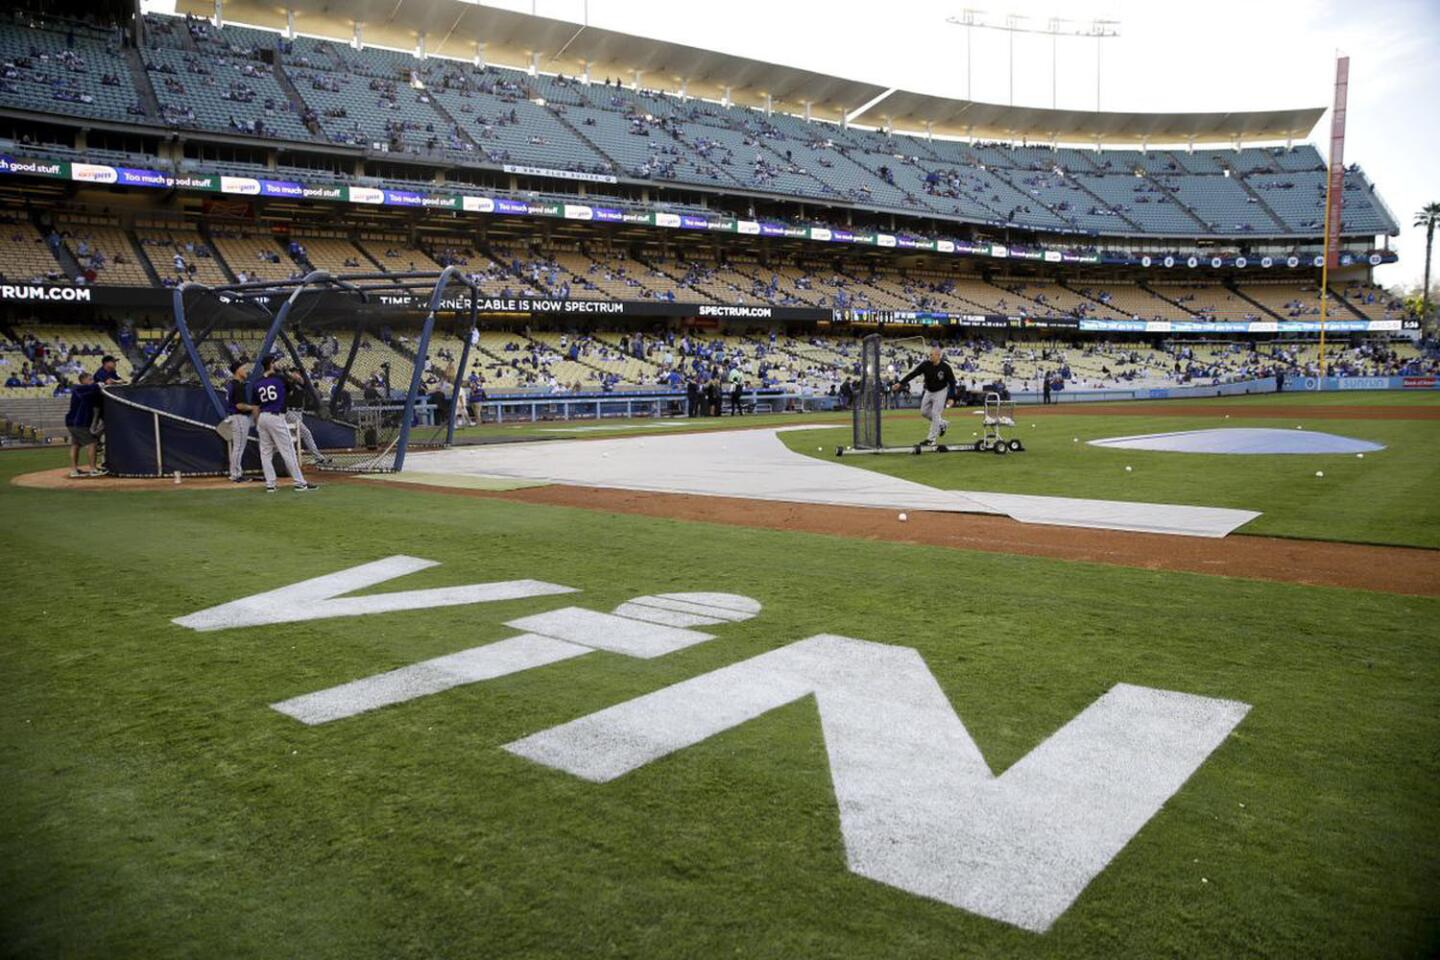 Hall of Fame Los Angeles Dodgers broadcaster Vin Scully's initials are painted on the field at Dodger Stadium before the team's baseball game against the Colorado Rockies, Friday, Sept. 23, 2016, in Los Angeles. Scully's final game at the stadium will be Sunday.